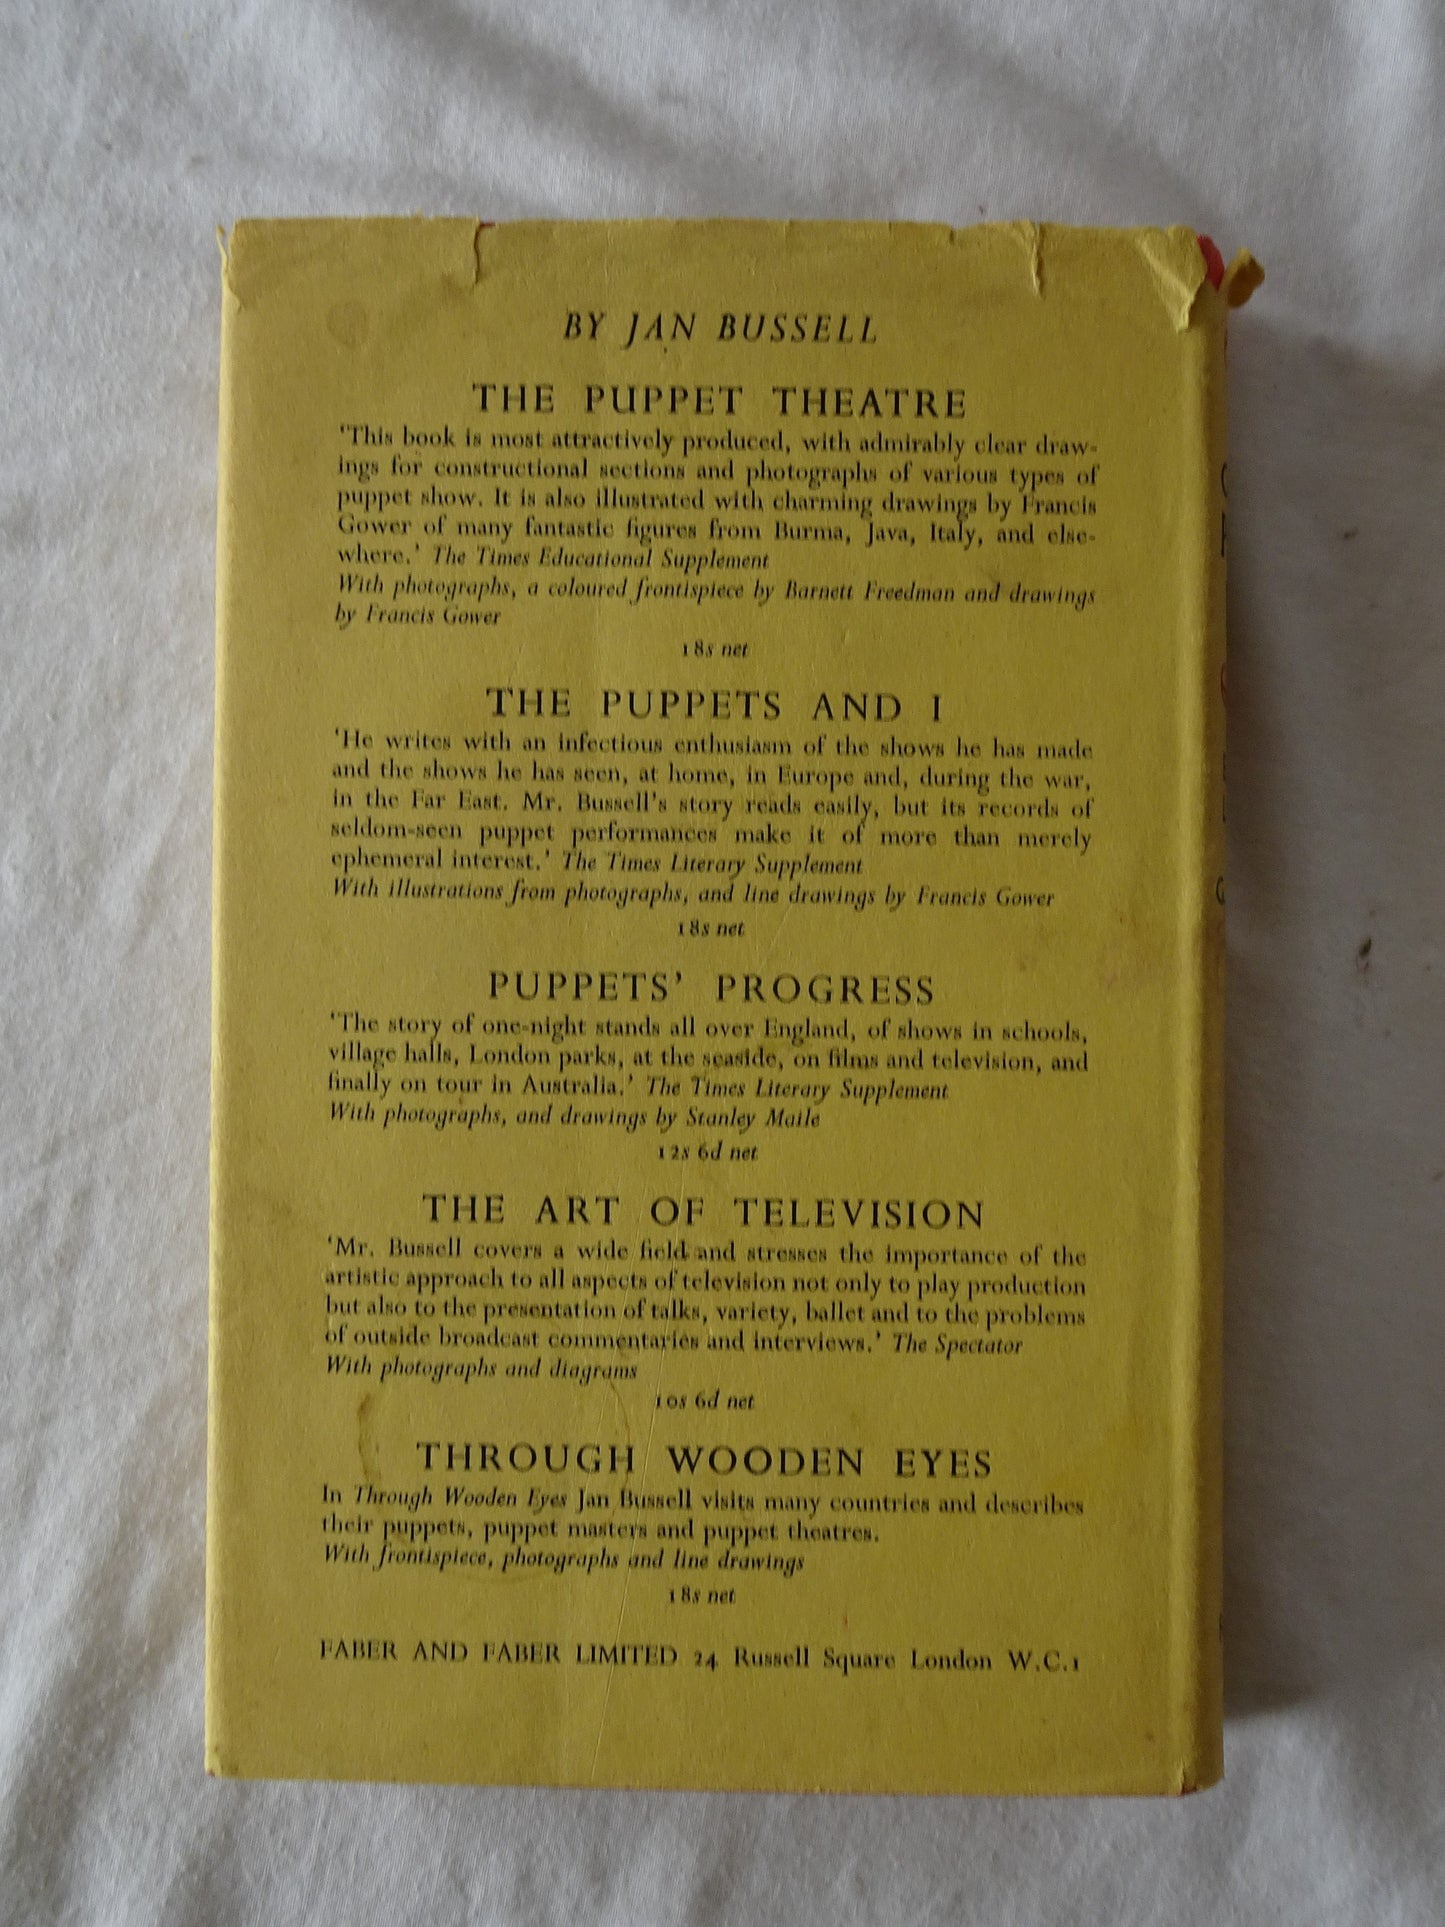 The Complete Puppet Book edited by L. V. Wall & G. A. White